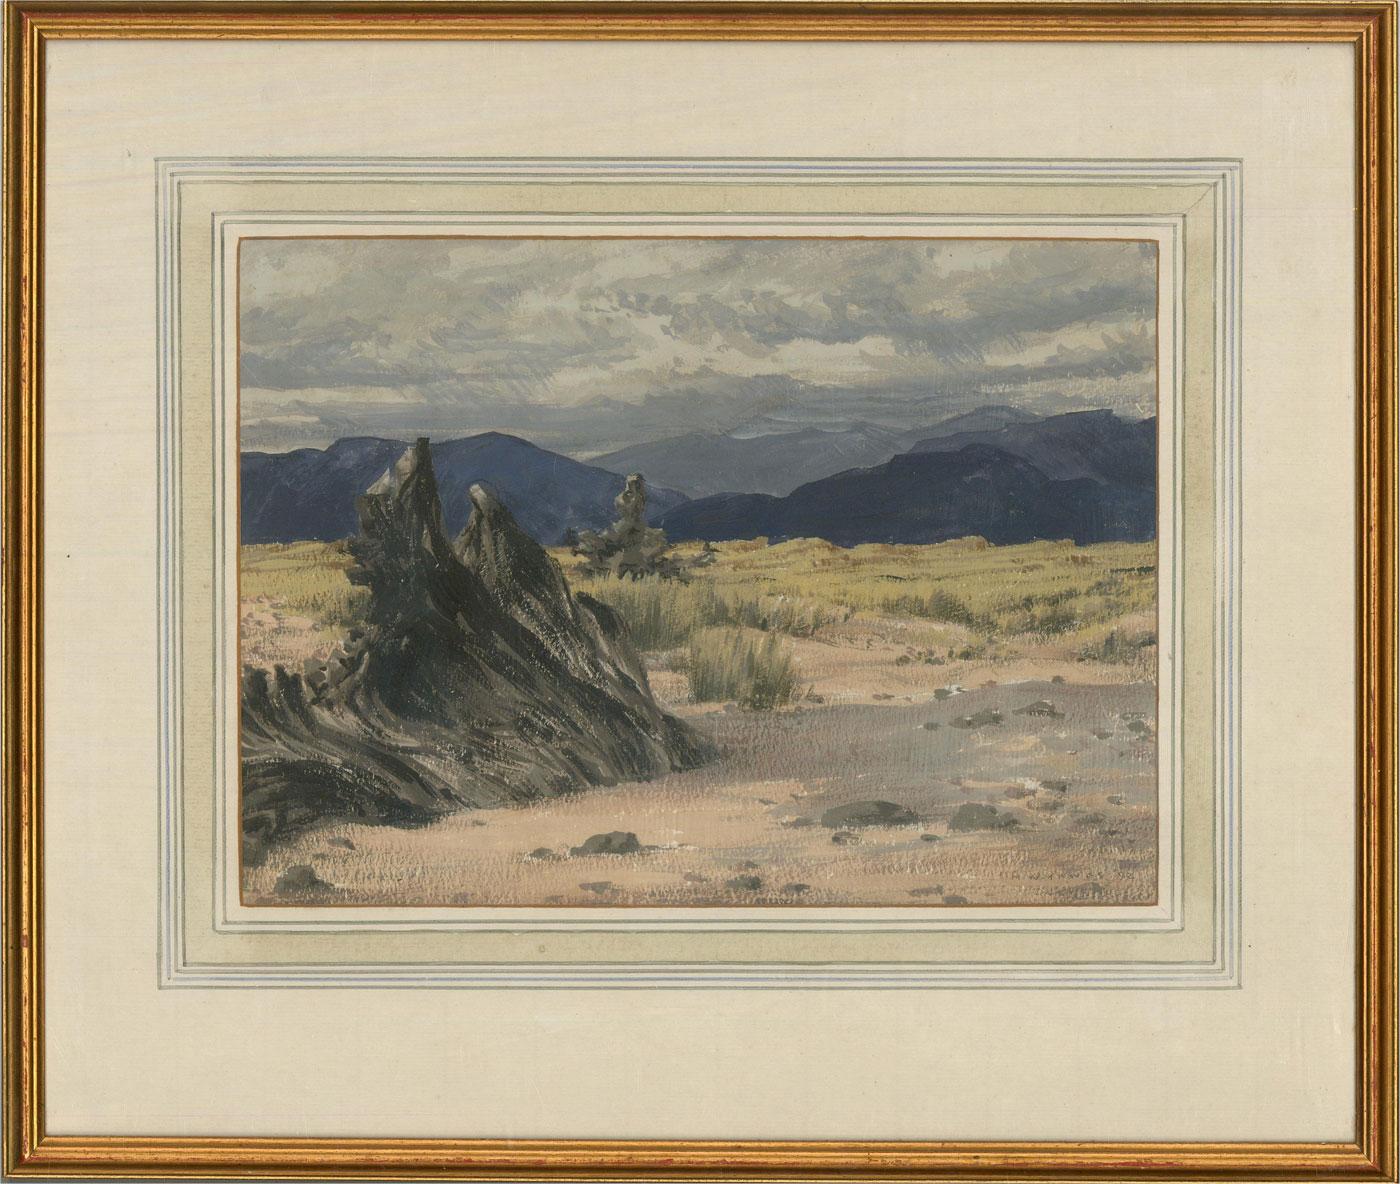 A captivating gouache painting by the British artist Meredith William Hawes, depicting a landscape scene with driftwood and mountains in the distance. Signed and dated to the lower right-hand corner. There is an exhibition label on the reverse